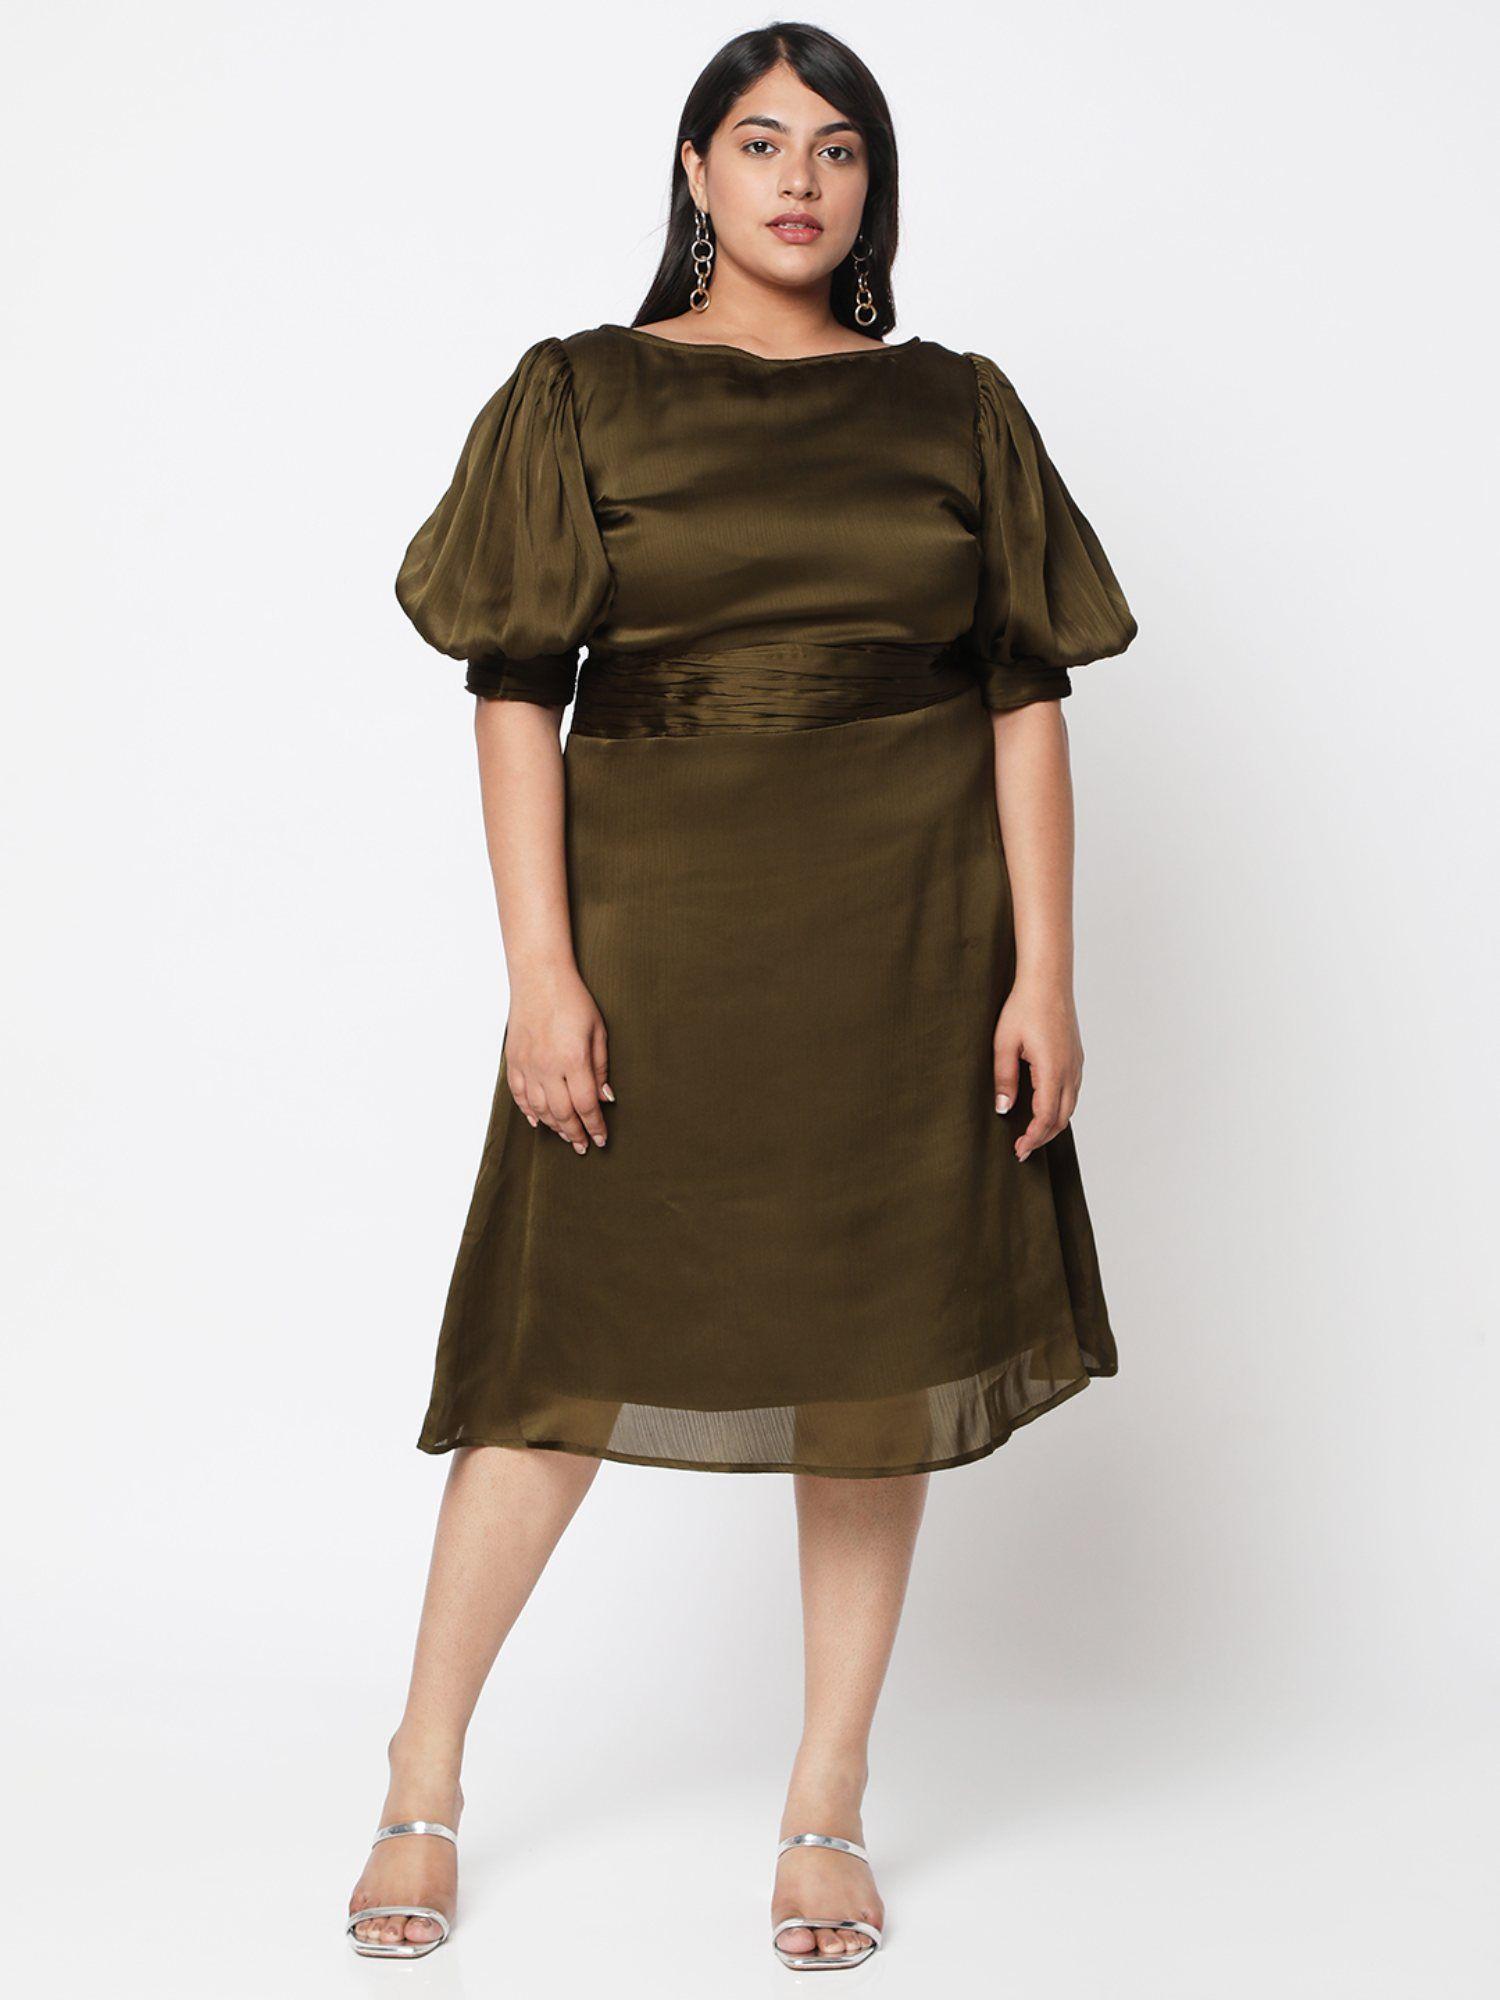 curves by mish ruched mid length dress